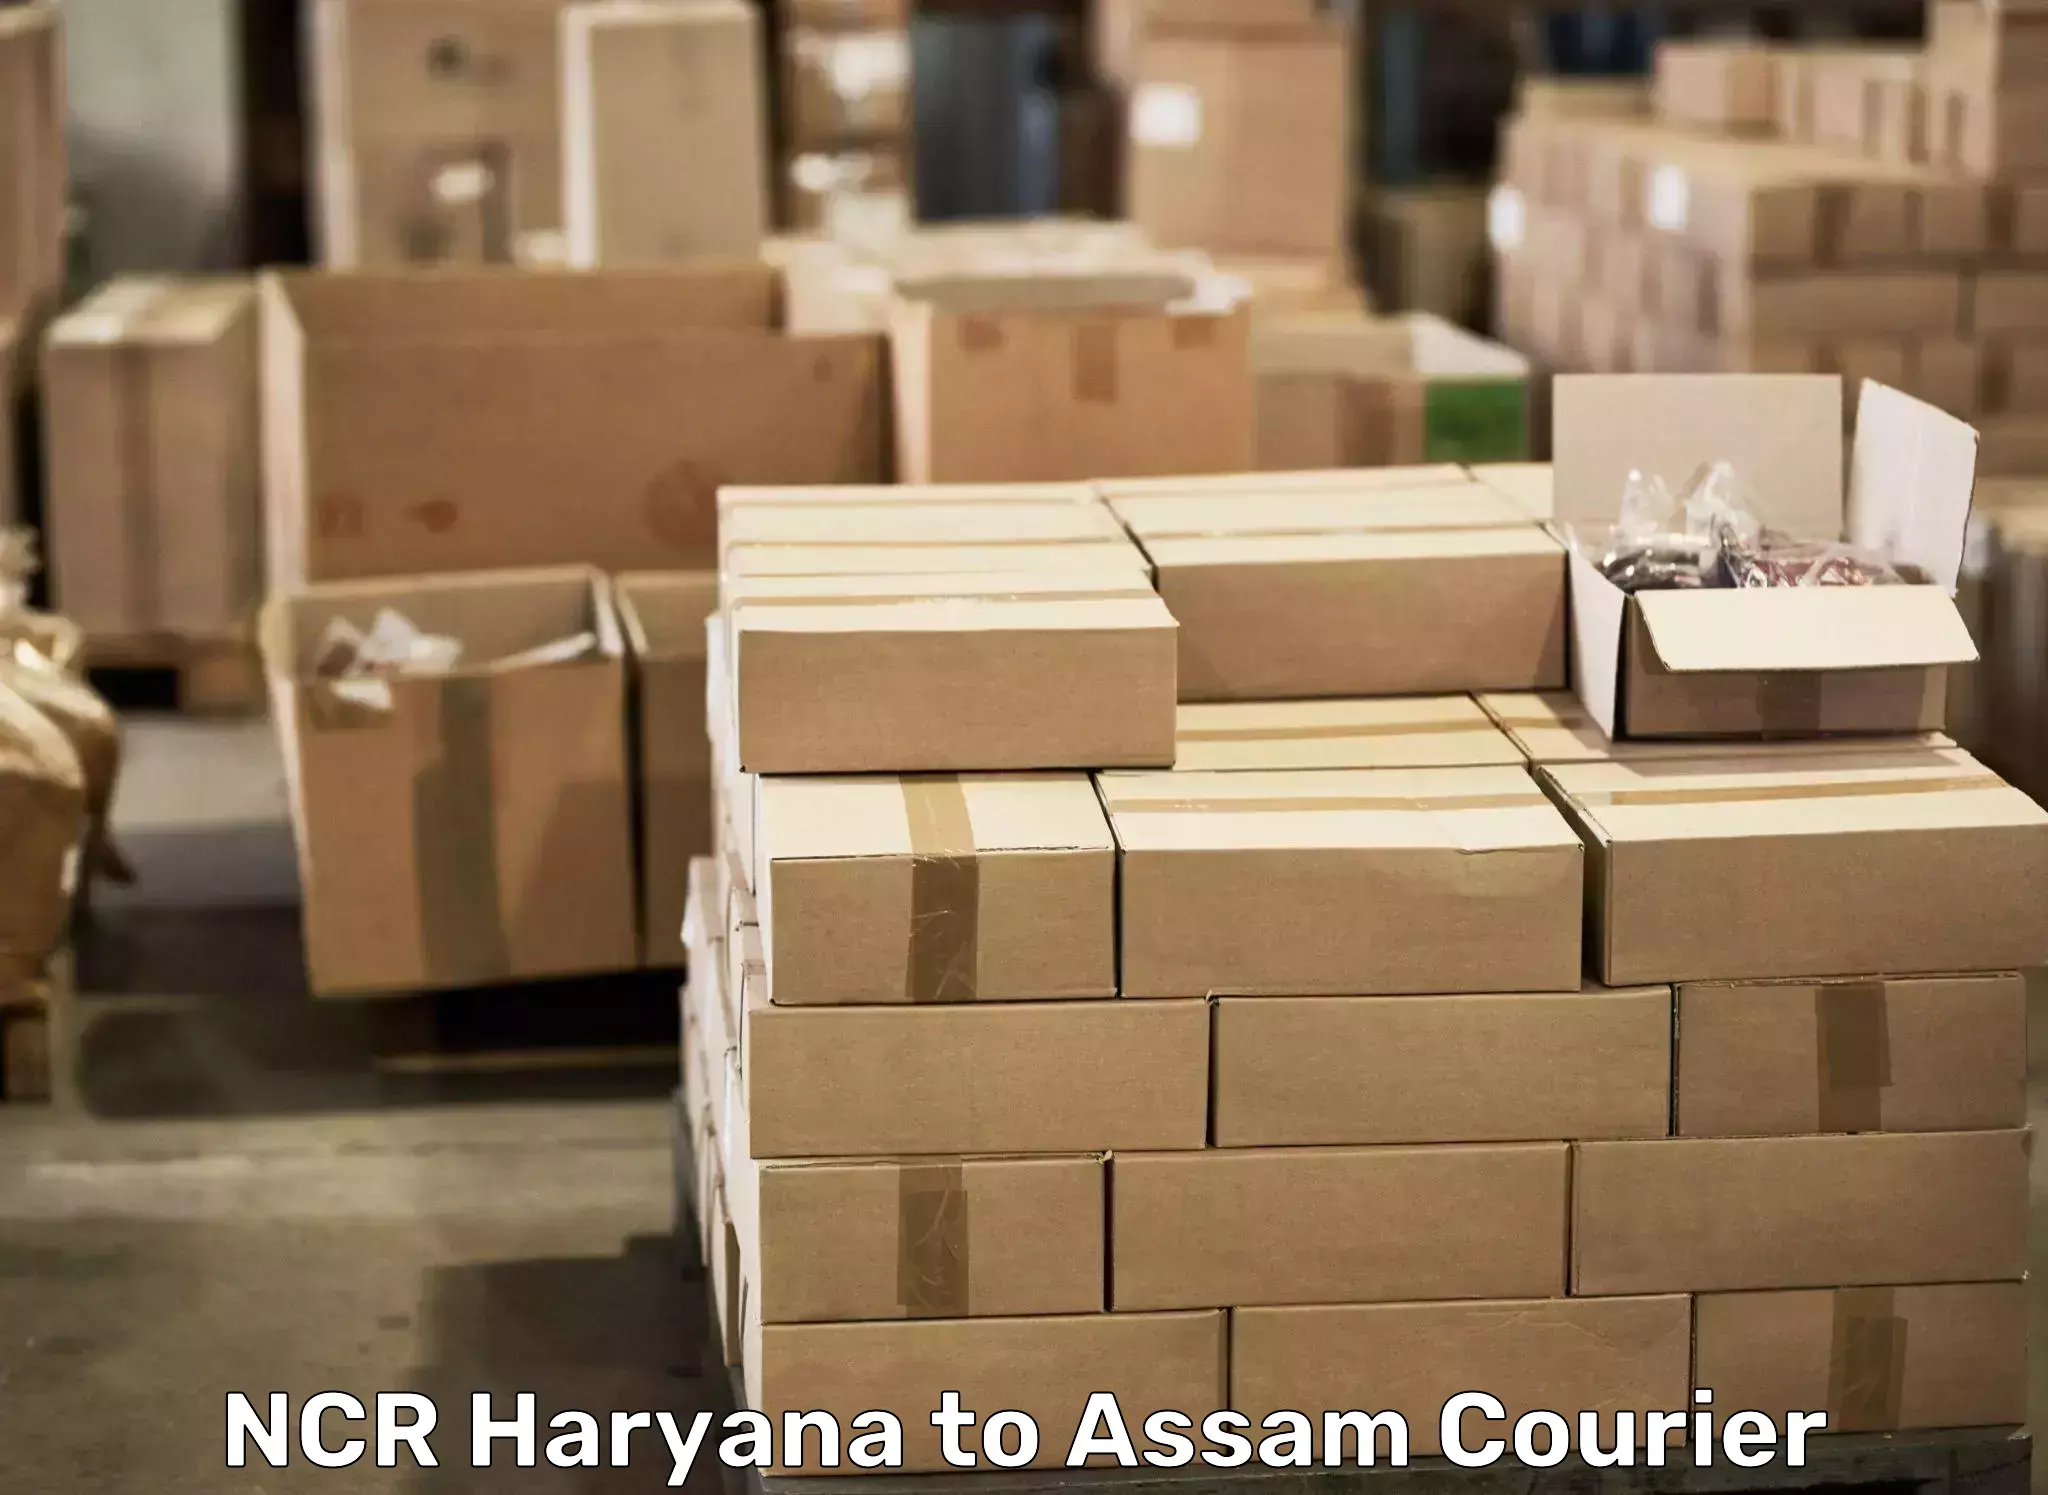 Moving and packing experts NCR Haryana to Mangaldoi